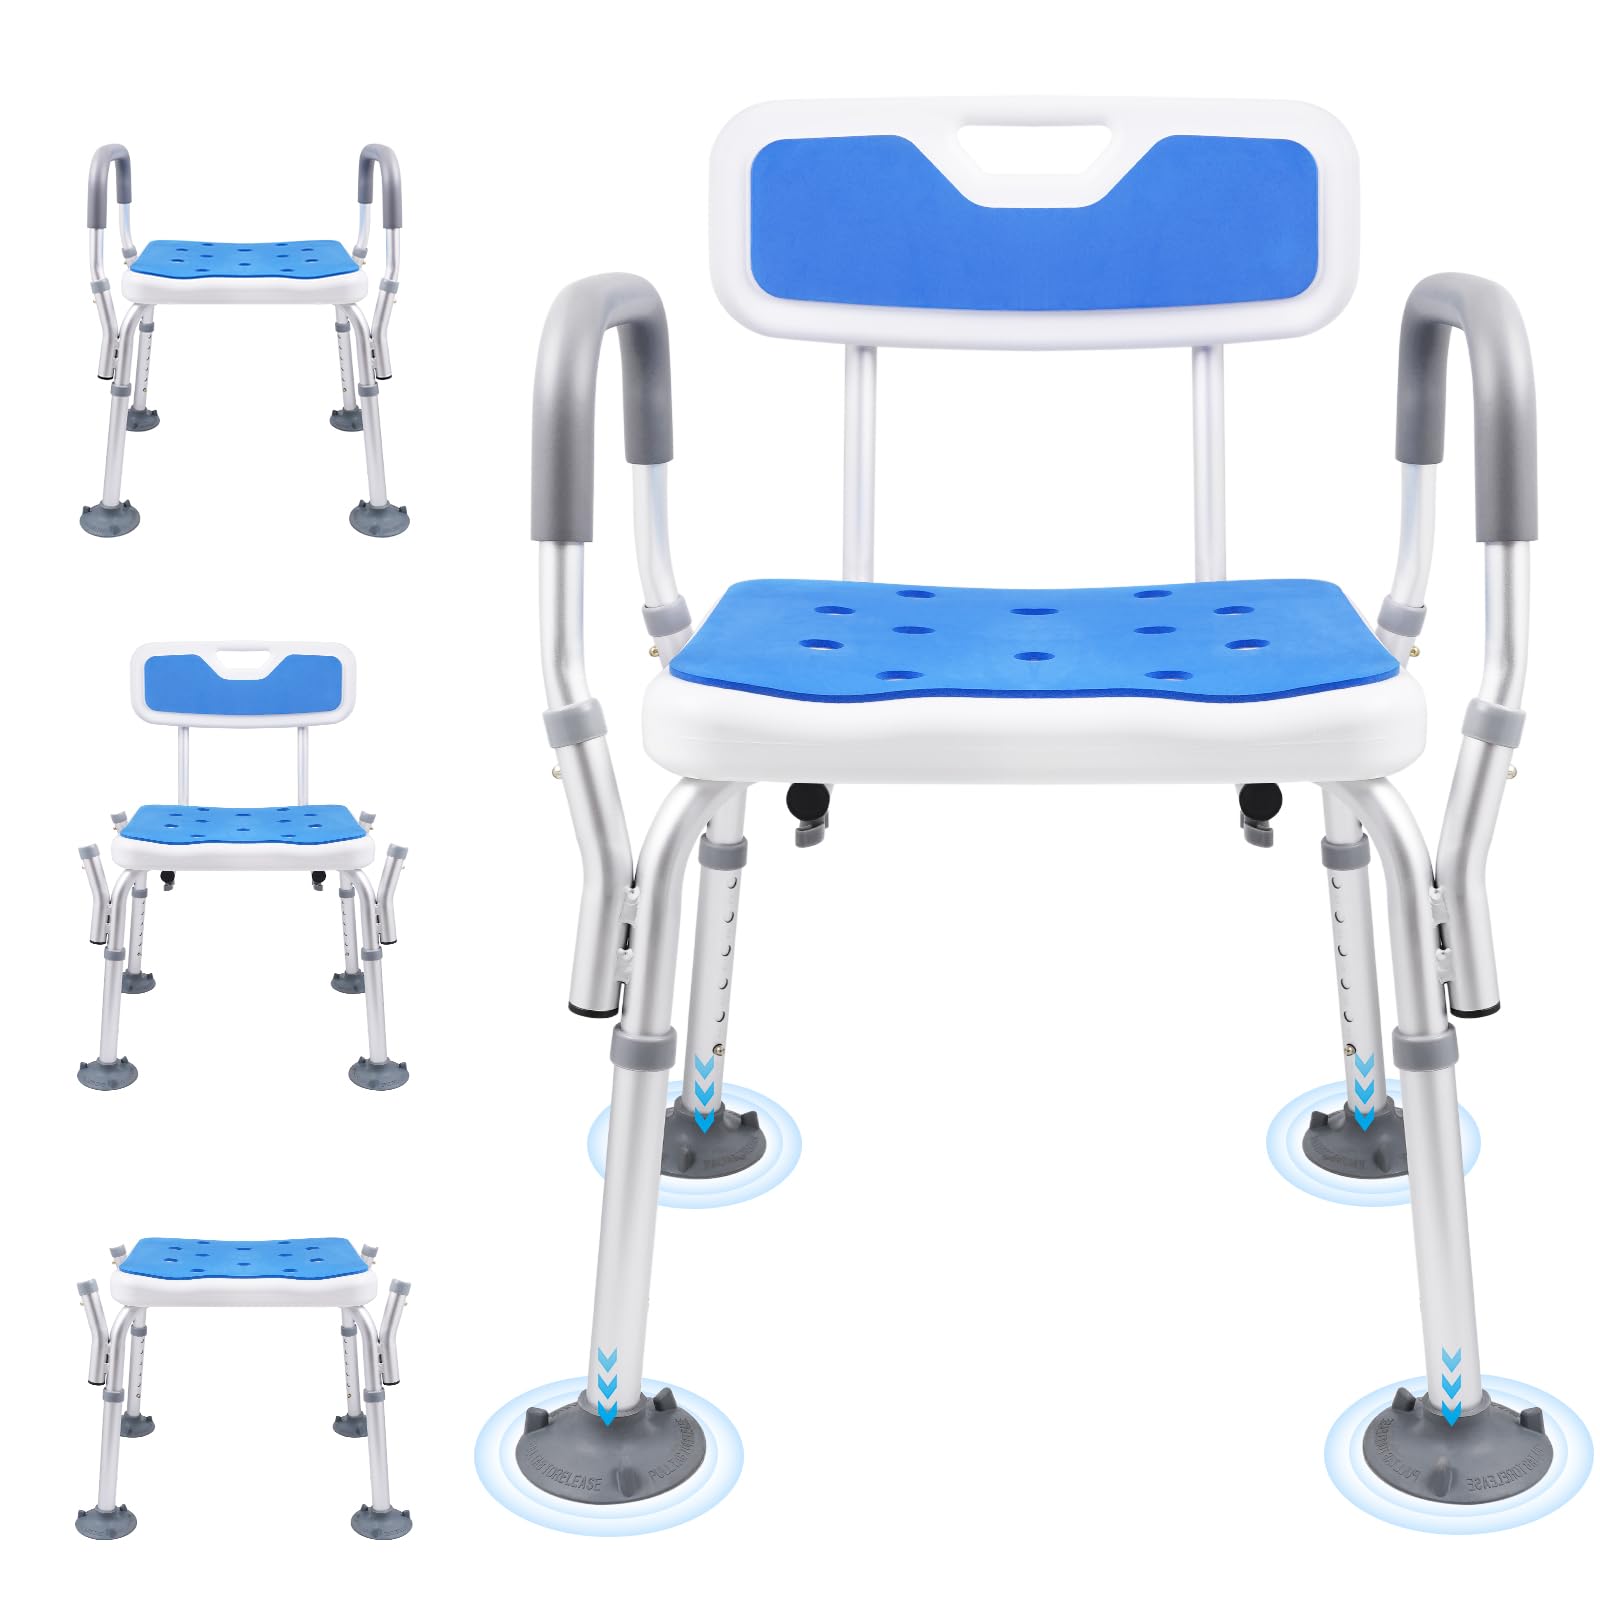 Adjustable Height Shower Chair-Hotodeal Height Shower Seat with Armrests and Backrest